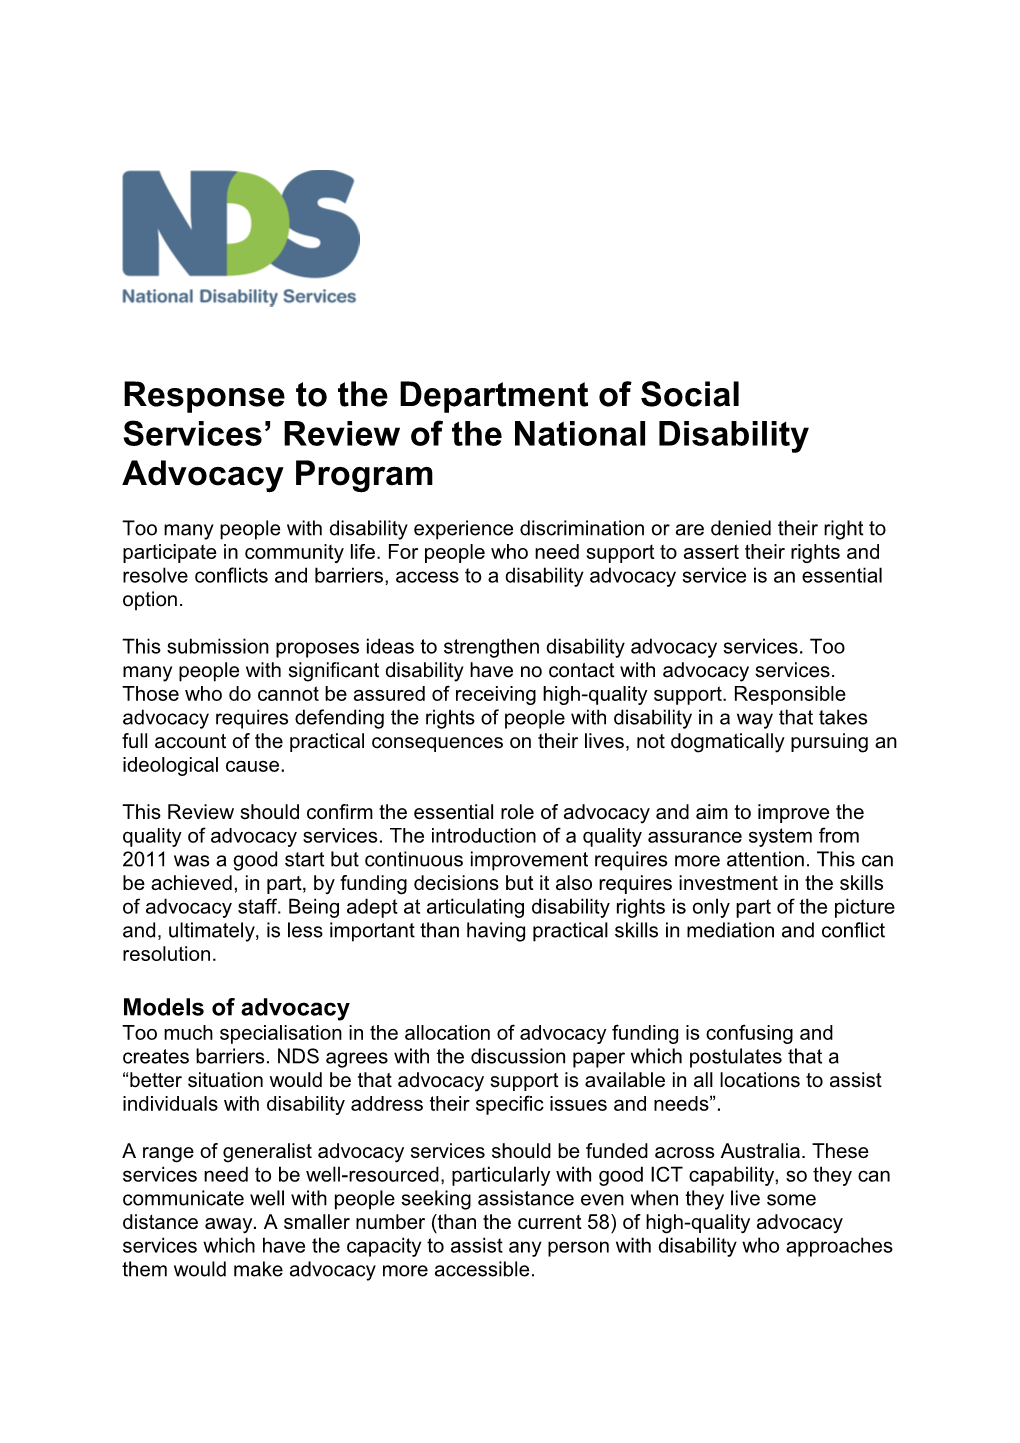 Response to the Department of Social Services Review of the National Disability Advocacy